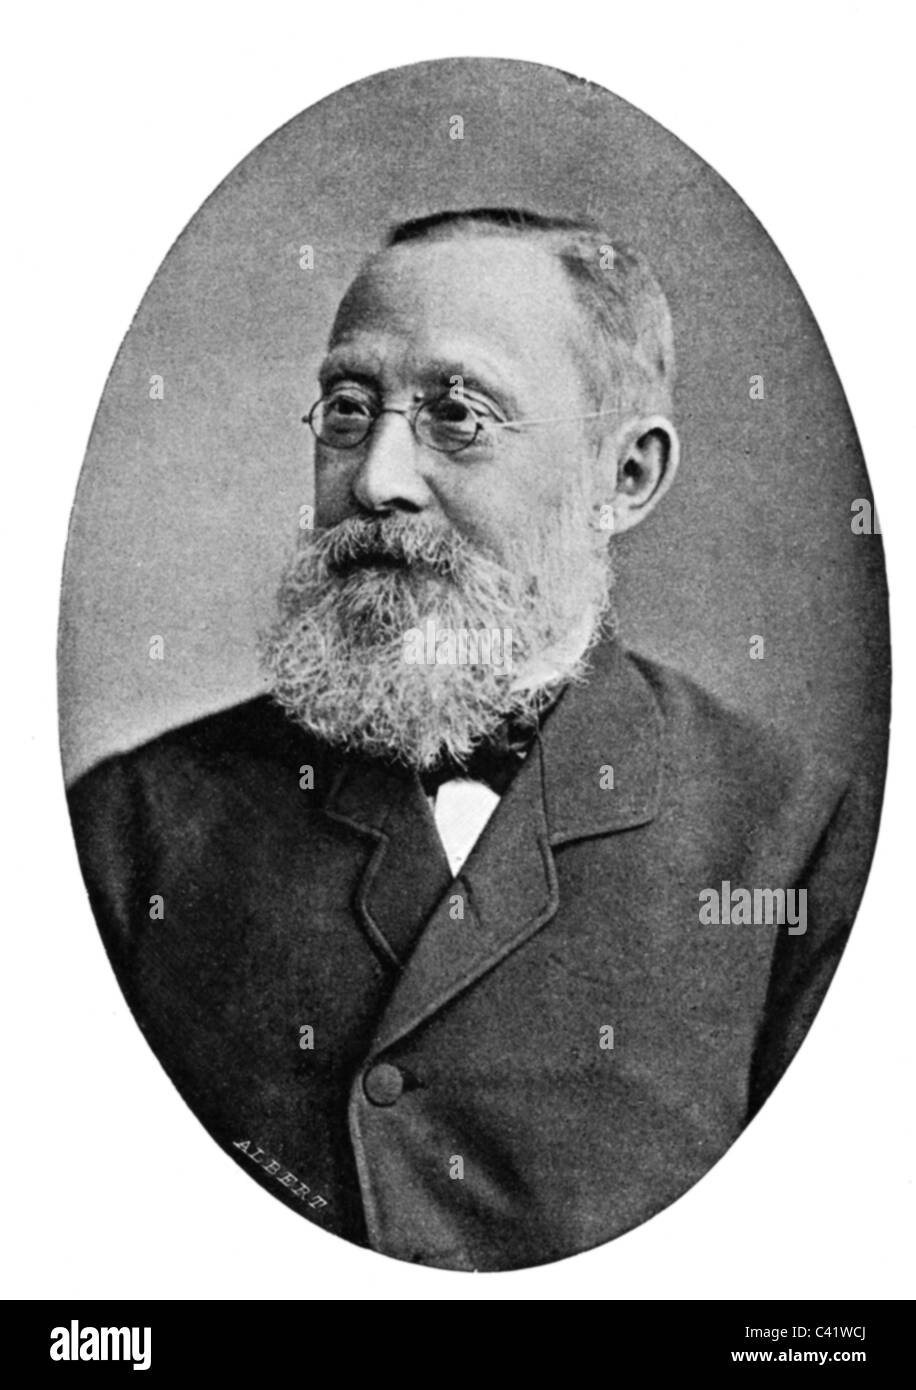 Virchow, Rudolf, 13.10.1821 - 5.9.1902, German physician and politician, portrait, late 19th century, Stock Photo